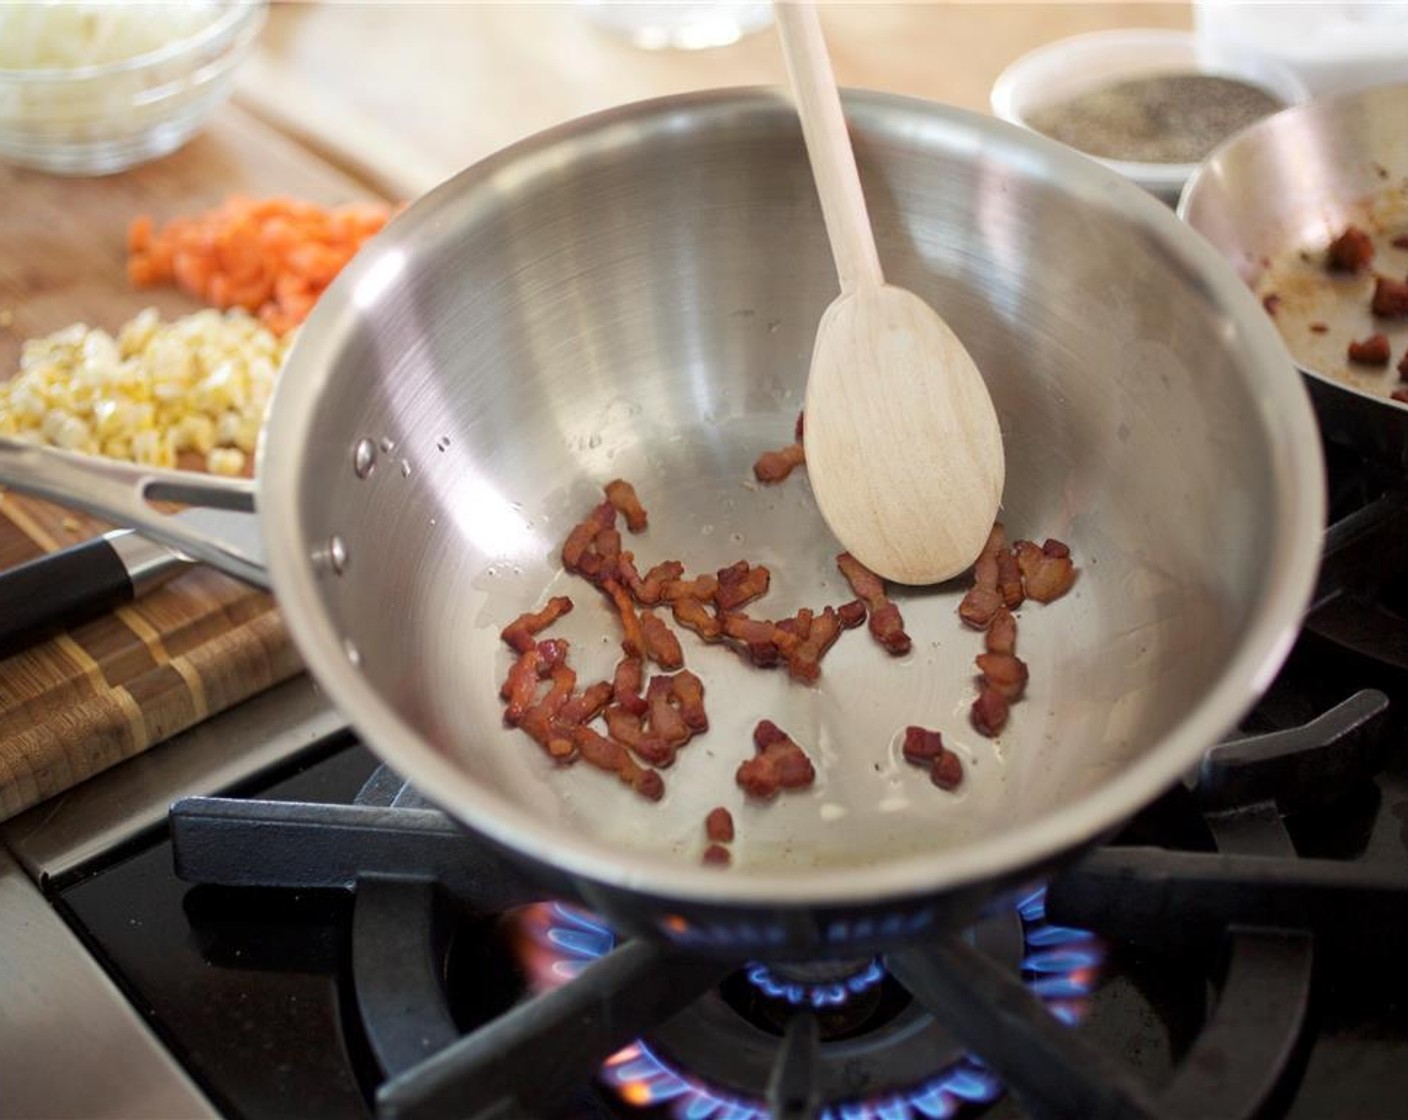 step 3 Heat a large saucepan over medium heat. When hot, add the Bacon (1 slice) and cook until browned, about 4 minutes.